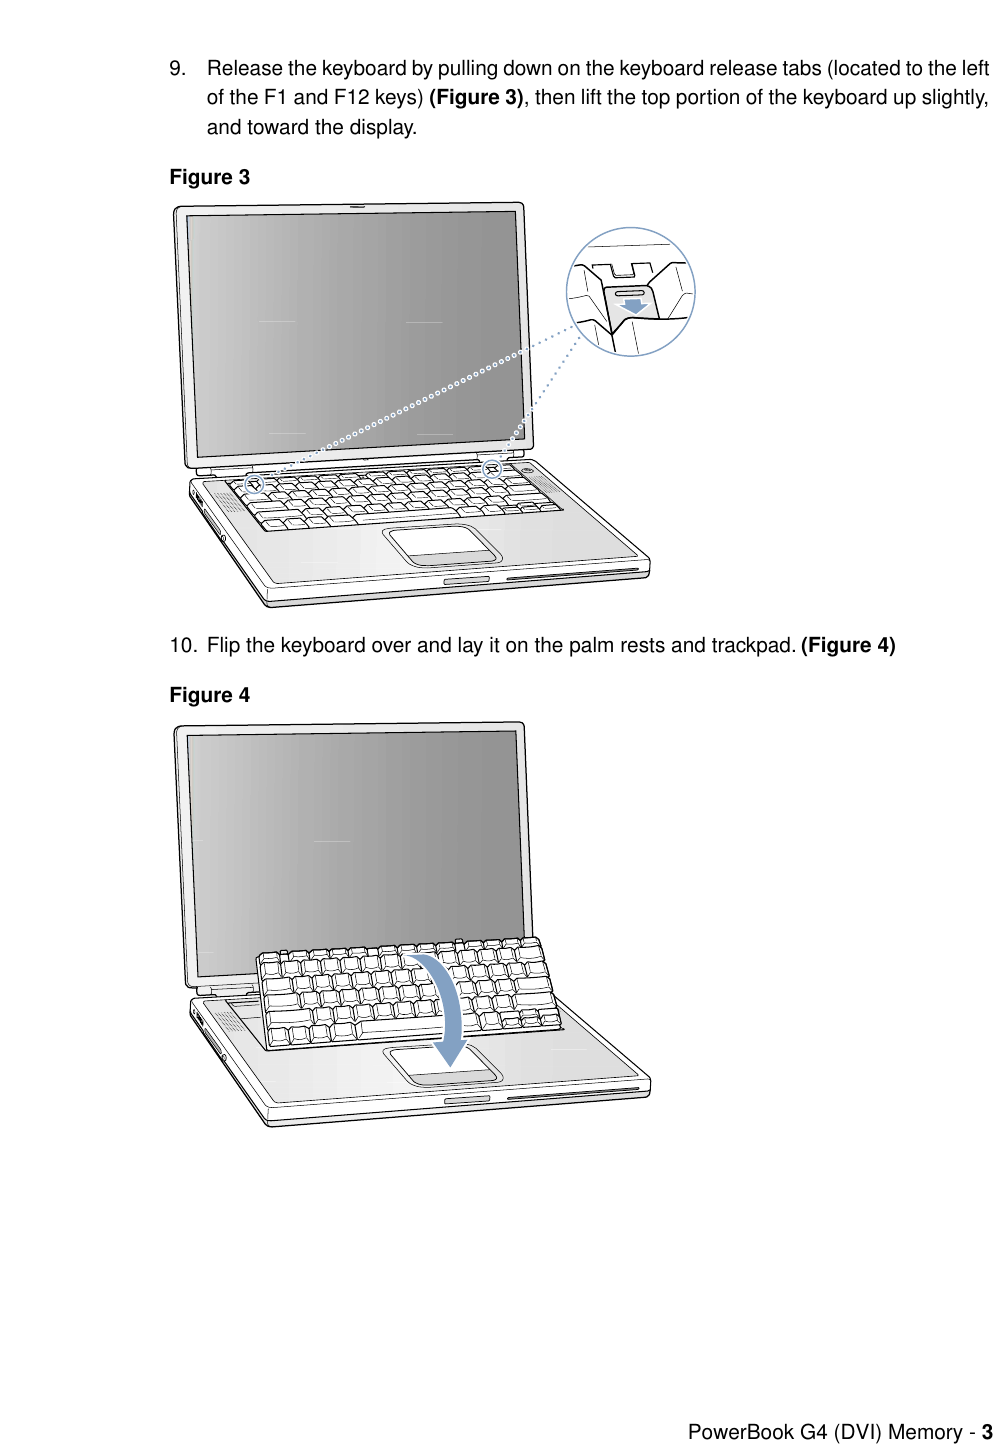 Page 3 of 7 - Apple PowerBook G4 (DVI) User Manual Power Book And (1GHz/867MHz) - Memory Card Replacement Instructions Pbg4dvi-mem-cip